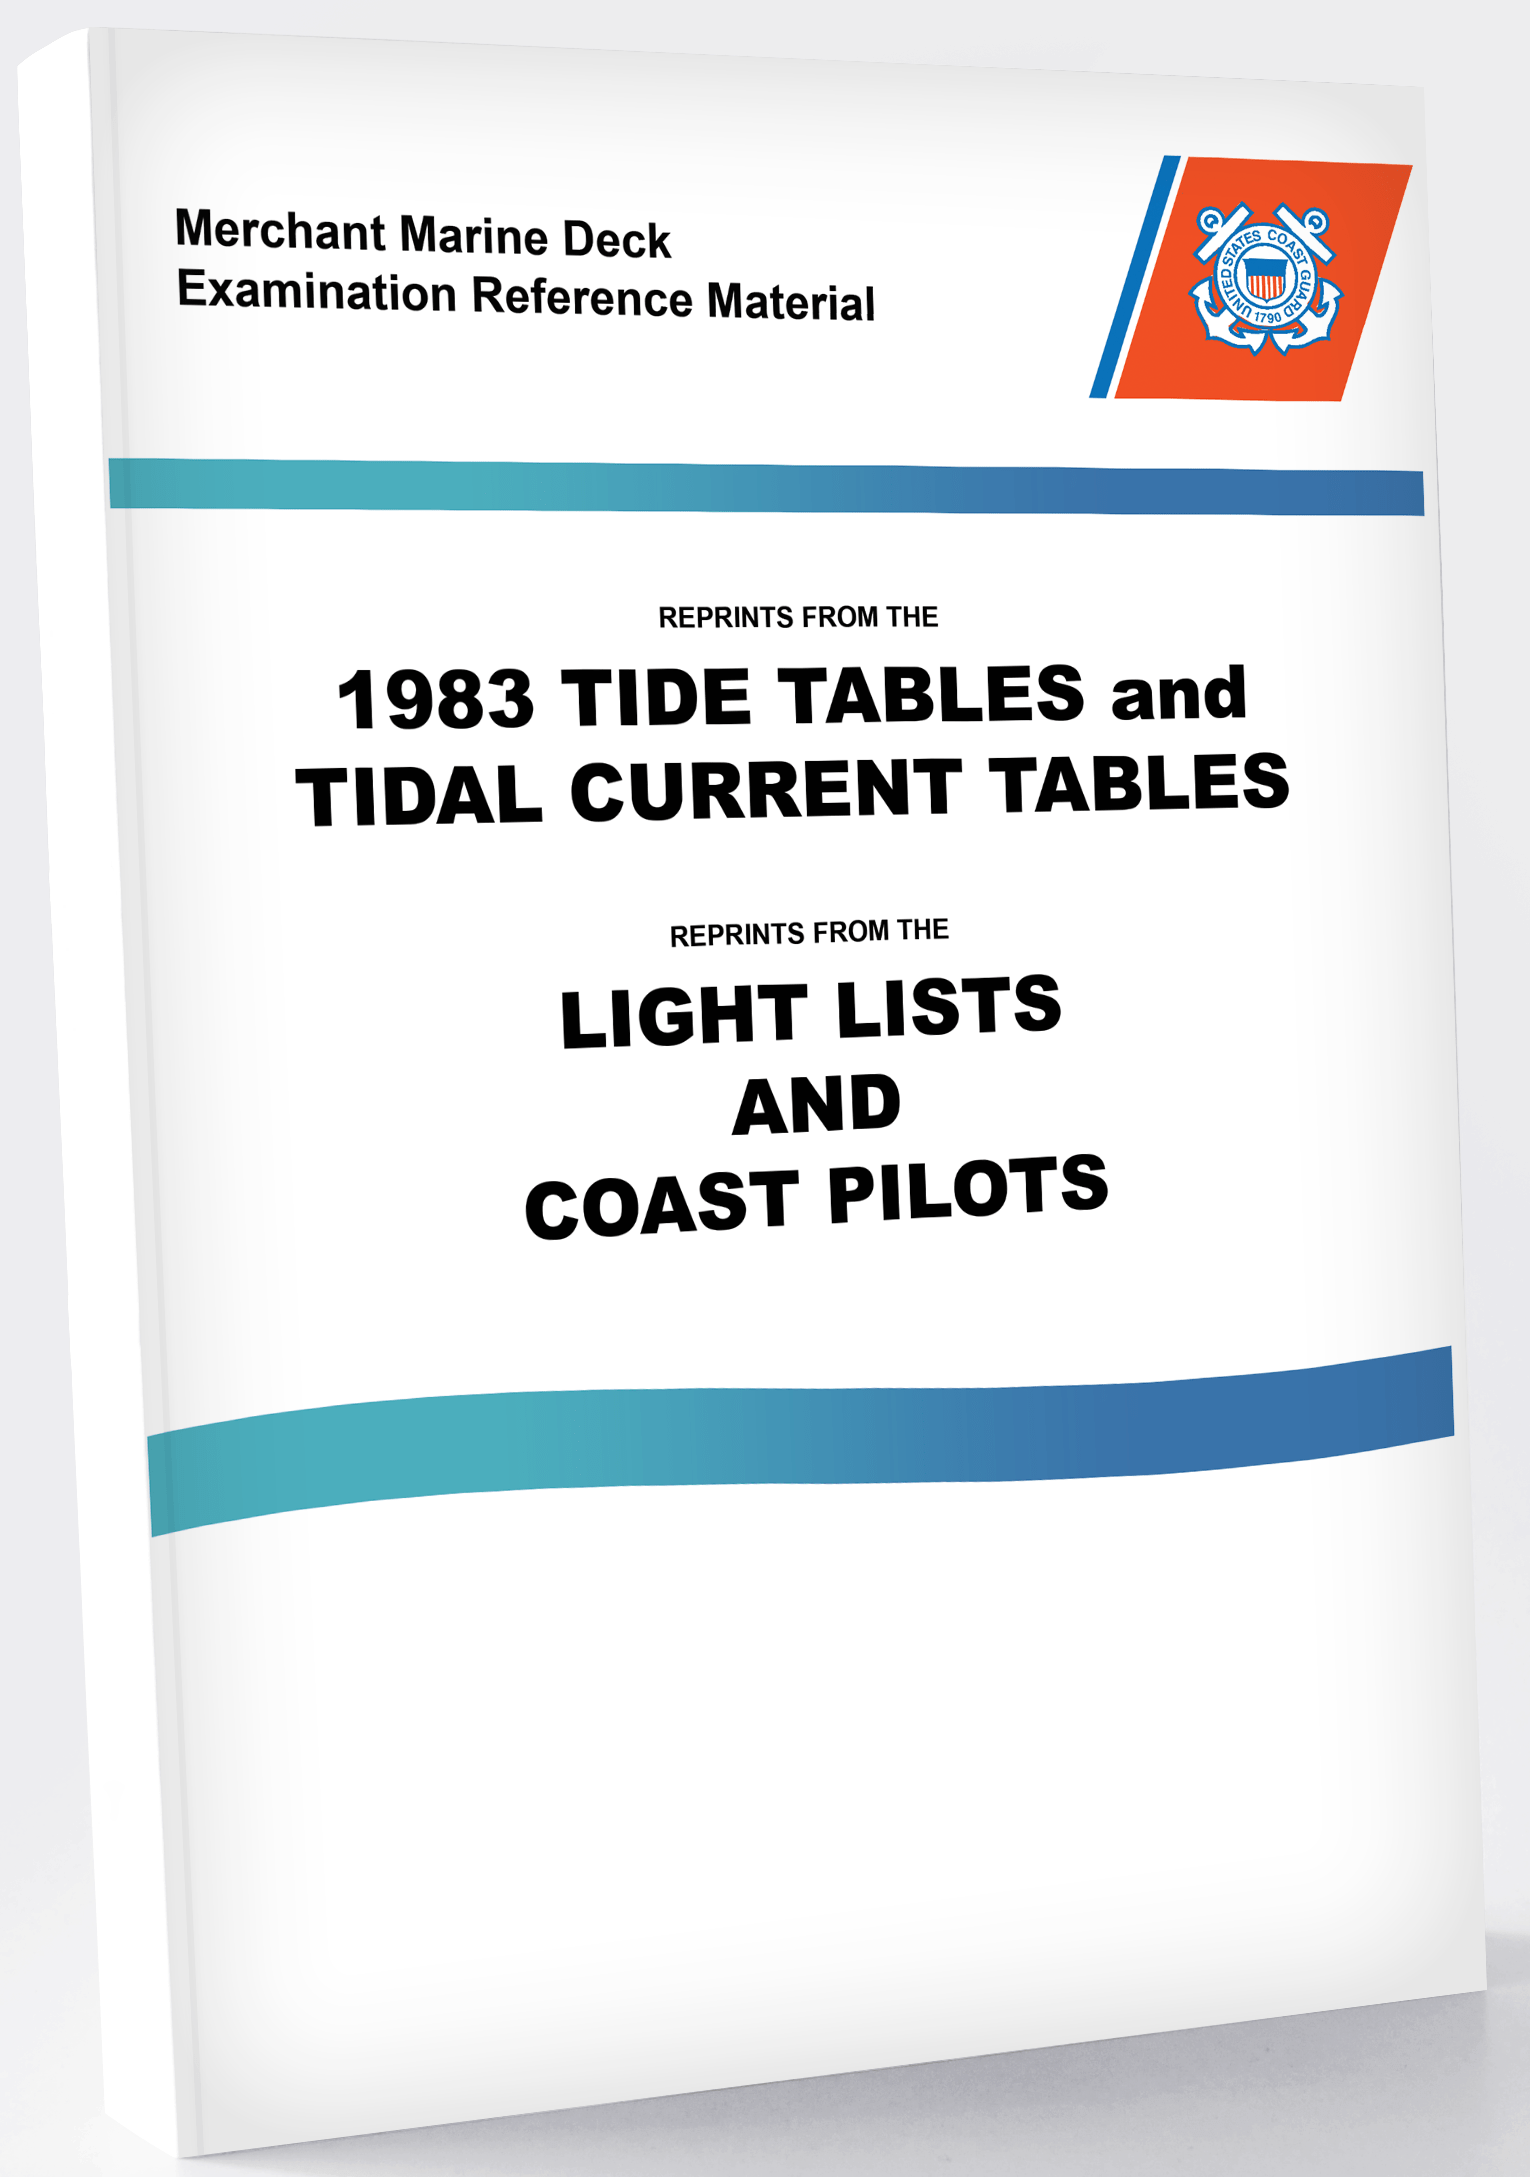 Merchant Marine Deck Examination Reference Material: Reprints From The Coast Pilots & Light Lists and and 1983 Tide Tables and Tidal Current Tables